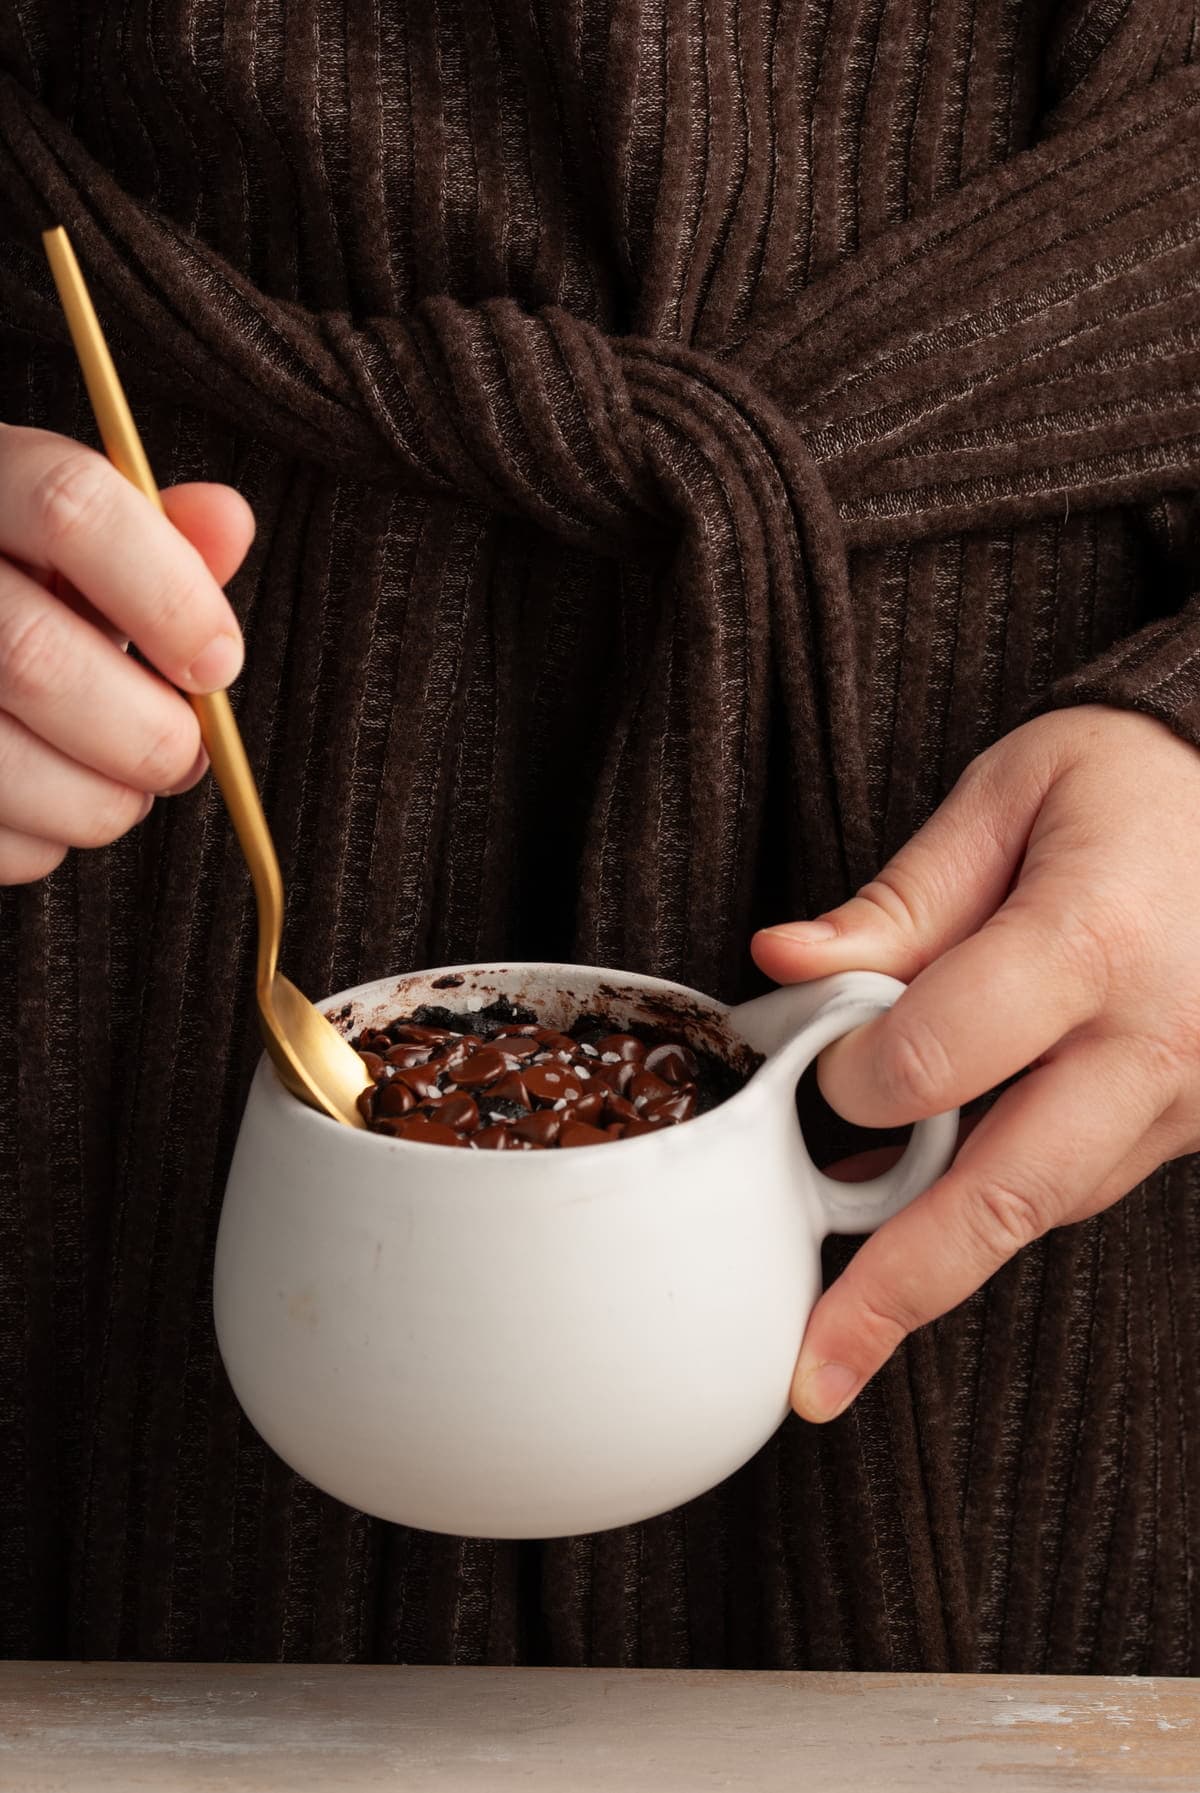 woman holding a chocolate dessert in a mug and taking a bite witha gold spoon